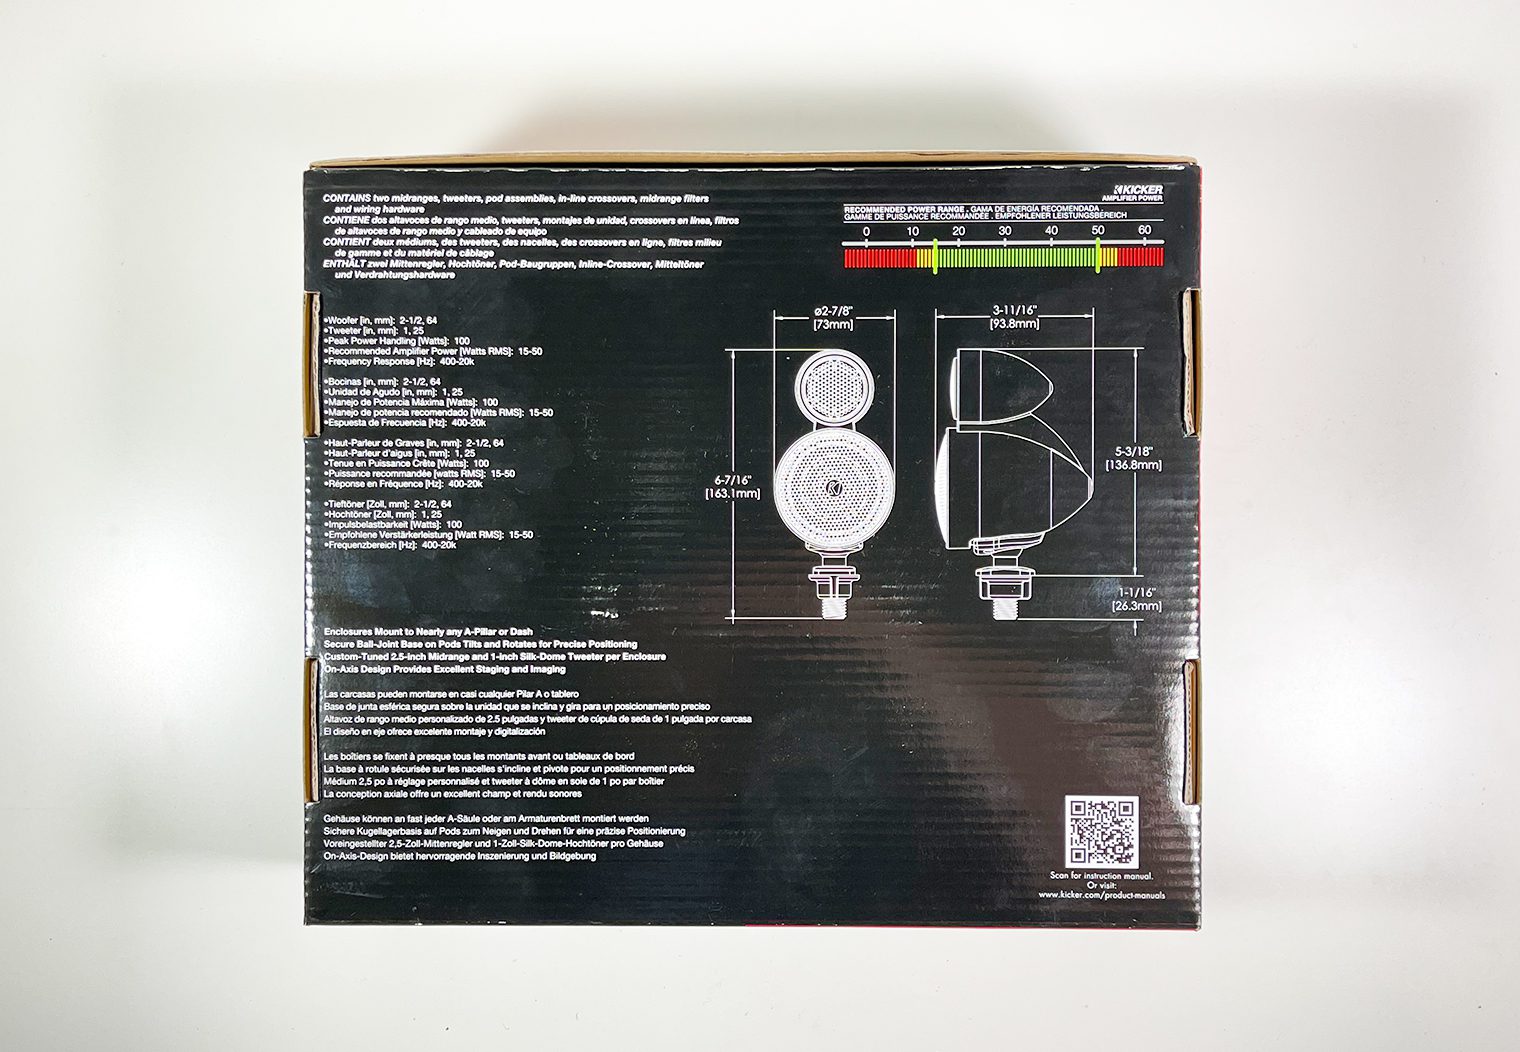 Kicker KSMT2504 back of the box before opening for the review